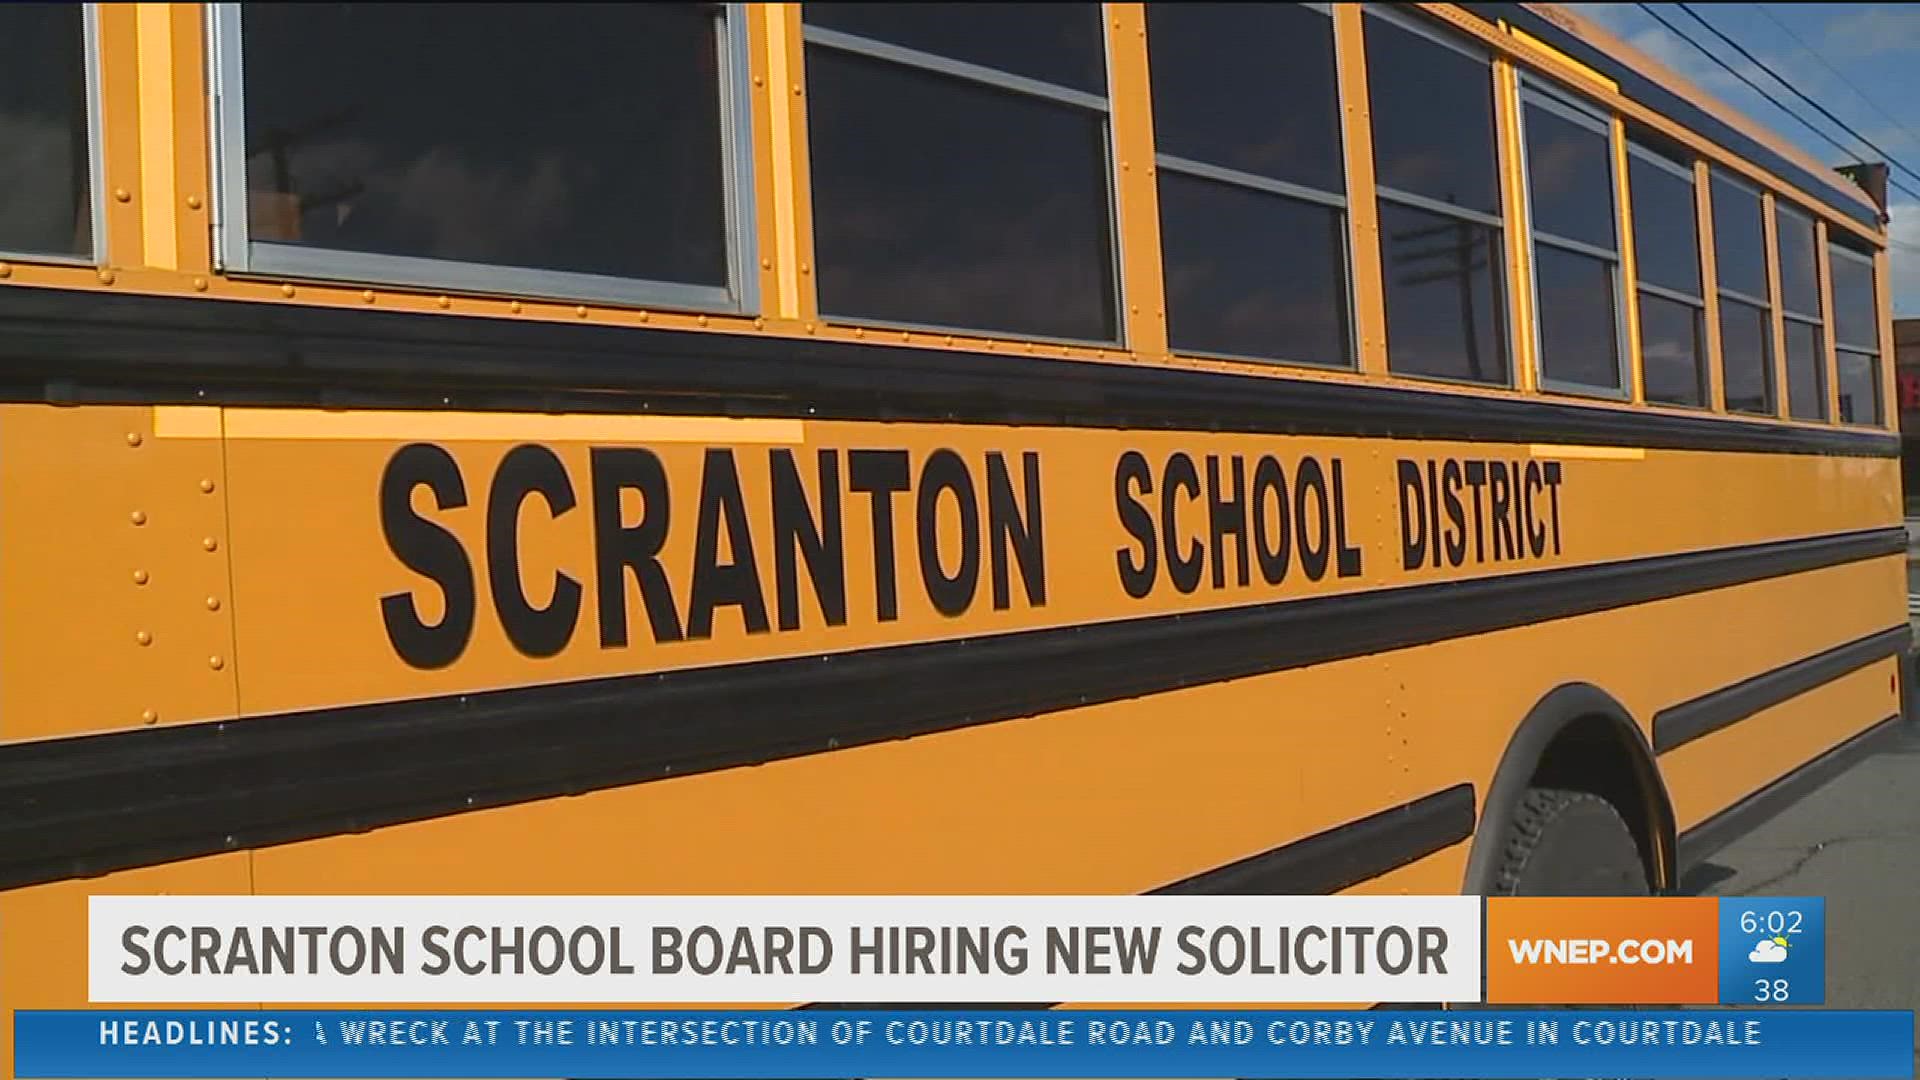 The controversy over bussing contracts in the Scranton School District has led to changes.